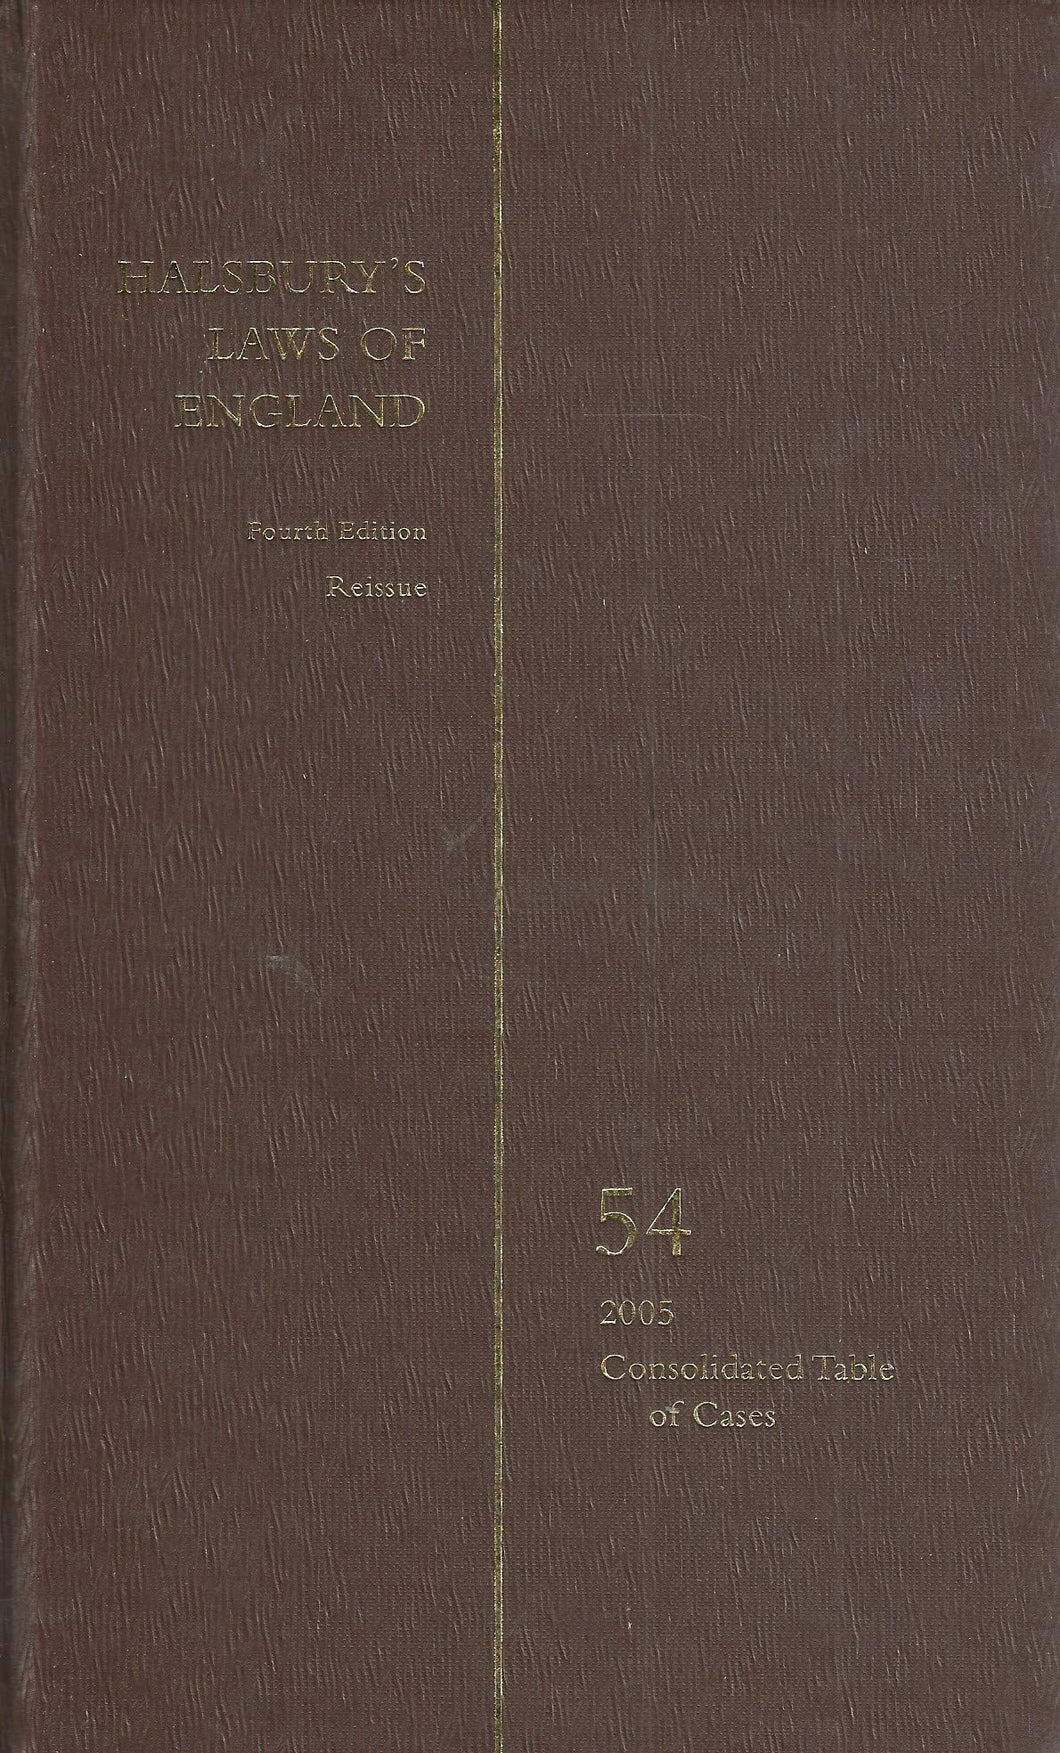 Halsbury's Laws of England - Fourth Edition Reissue - 54: 2005 Consolidated Table of Cases